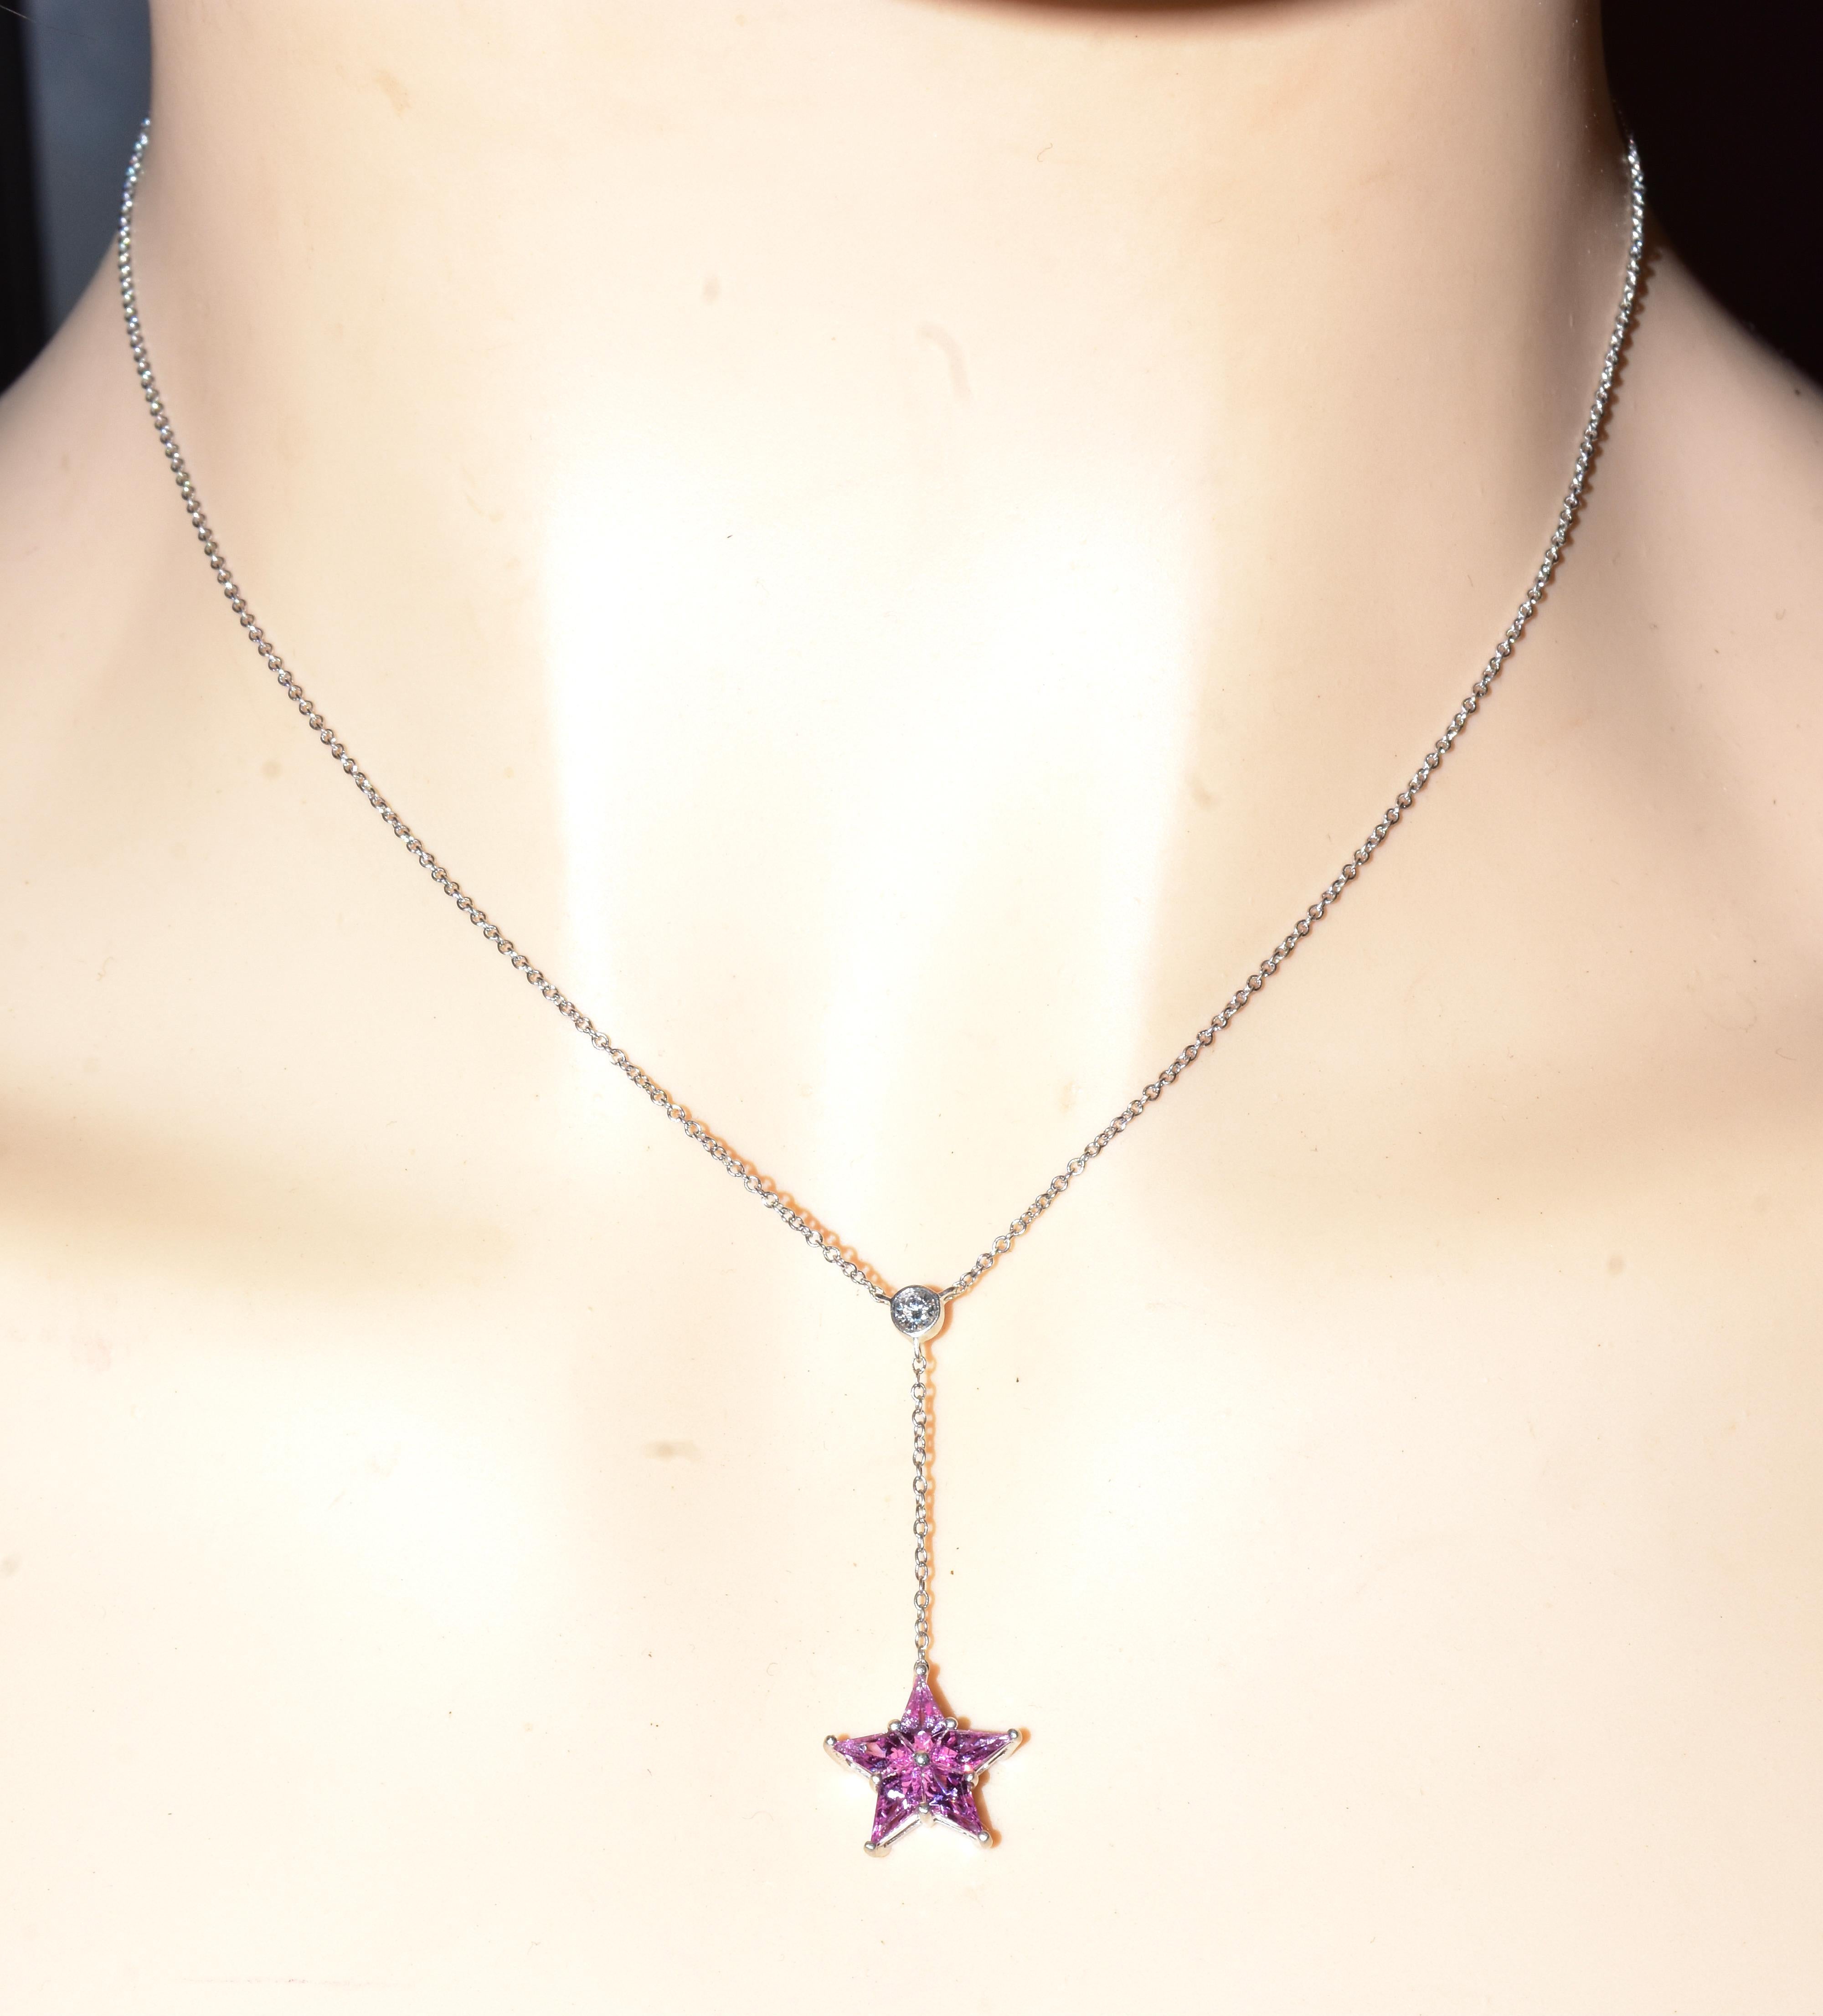 Contemporary Tiffany & Co. Pink Sapphire, Diamond and Platinum Star Motif Necklace